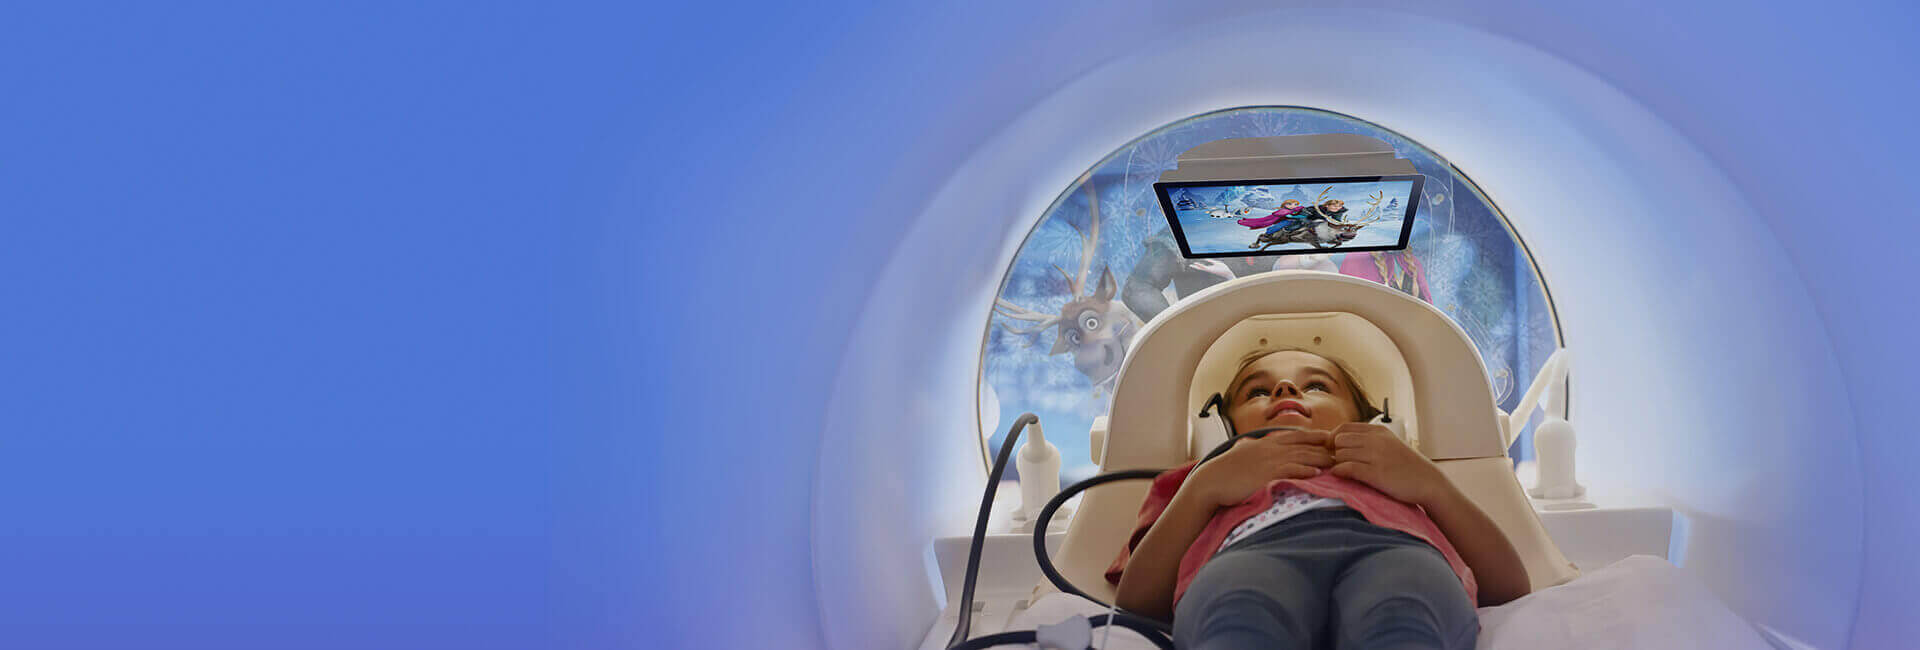 Star Imaging and Research Centre Paediatric MRI